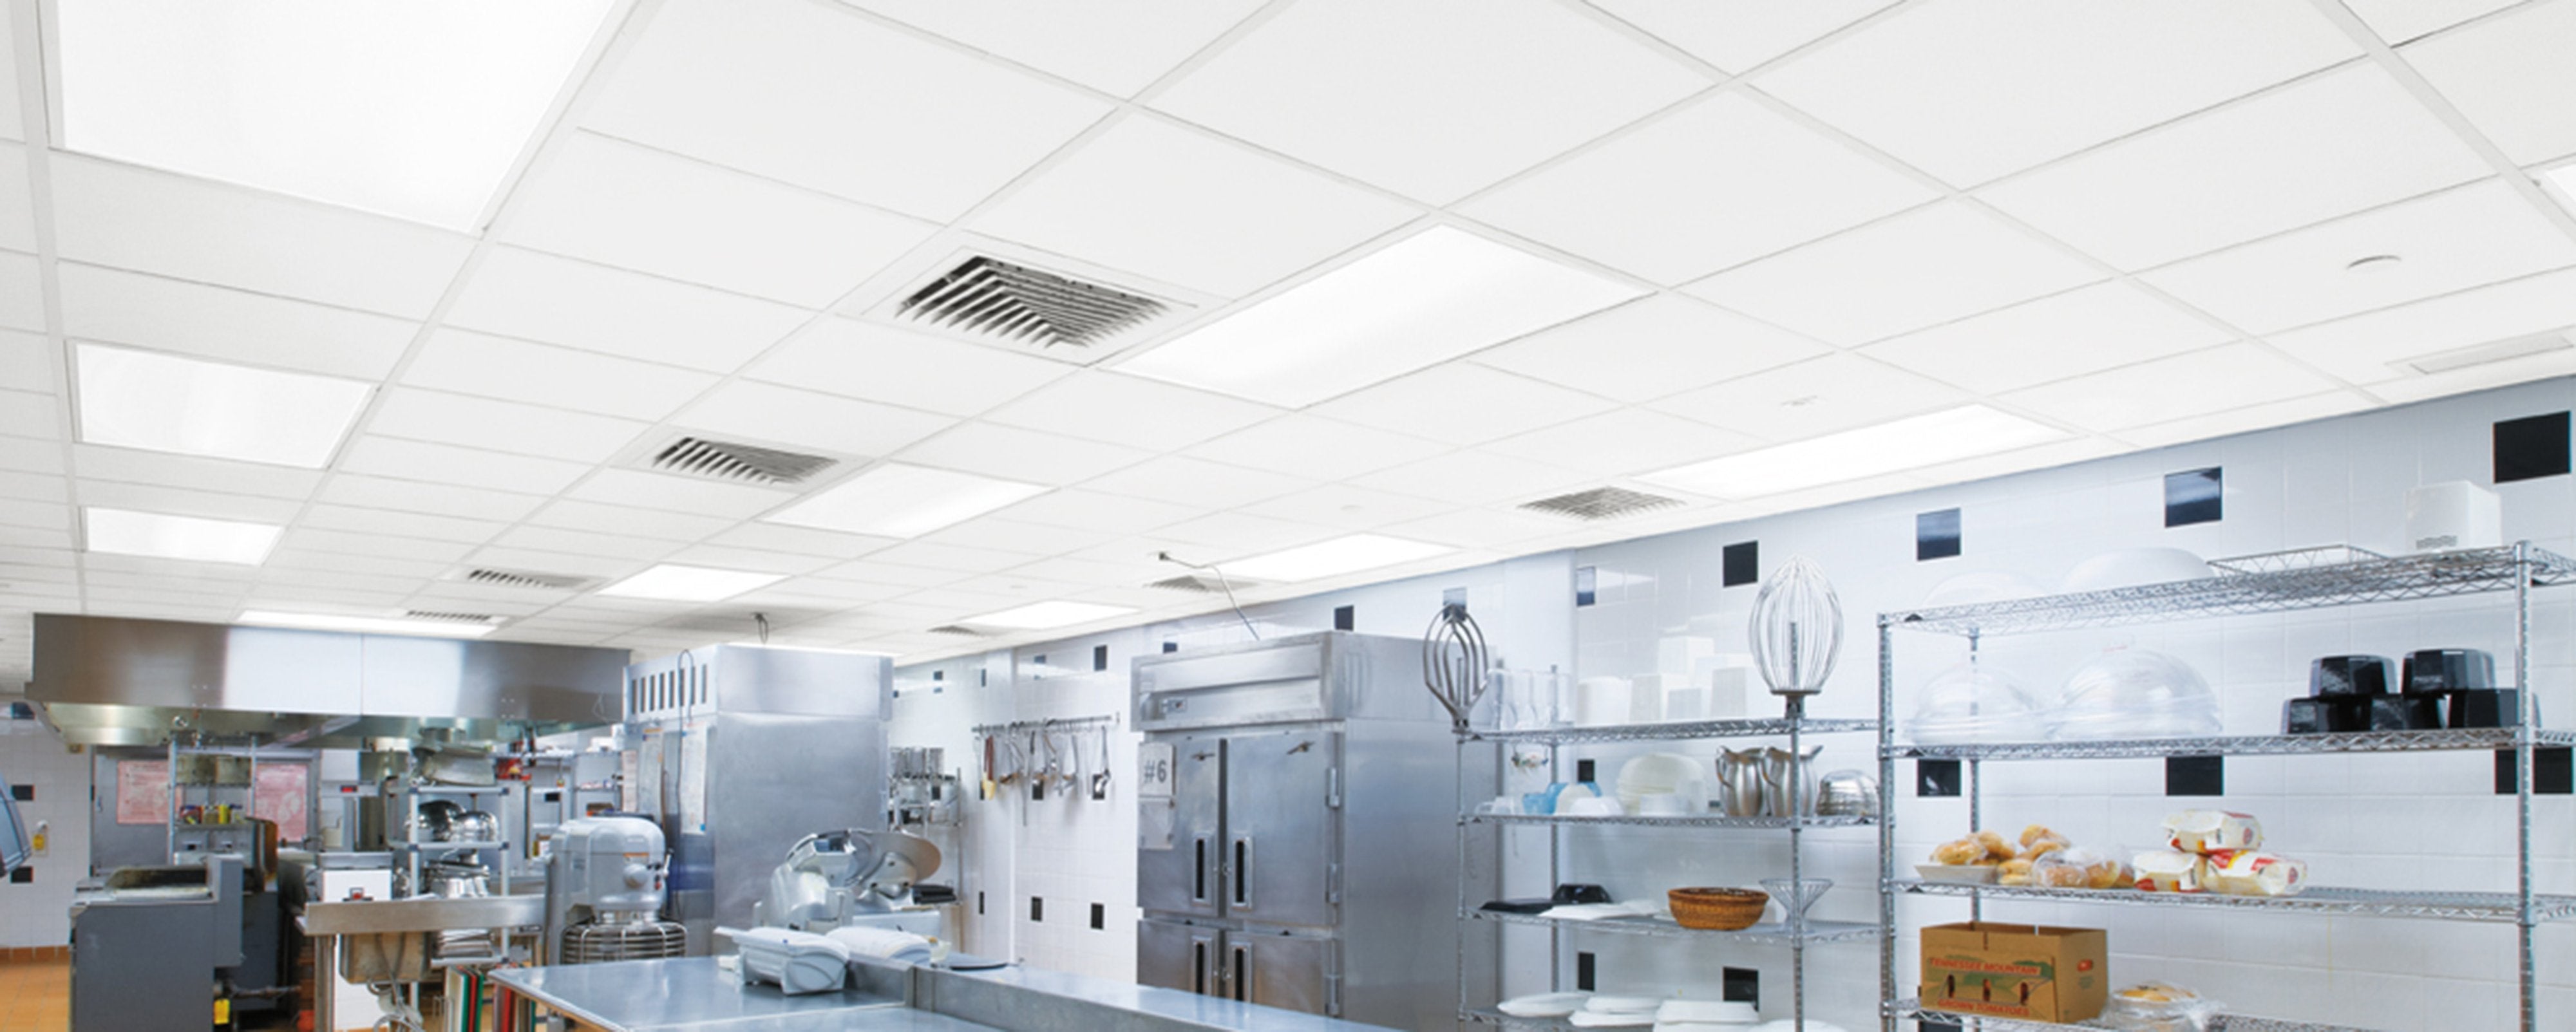 commercial kitchen ceiling light